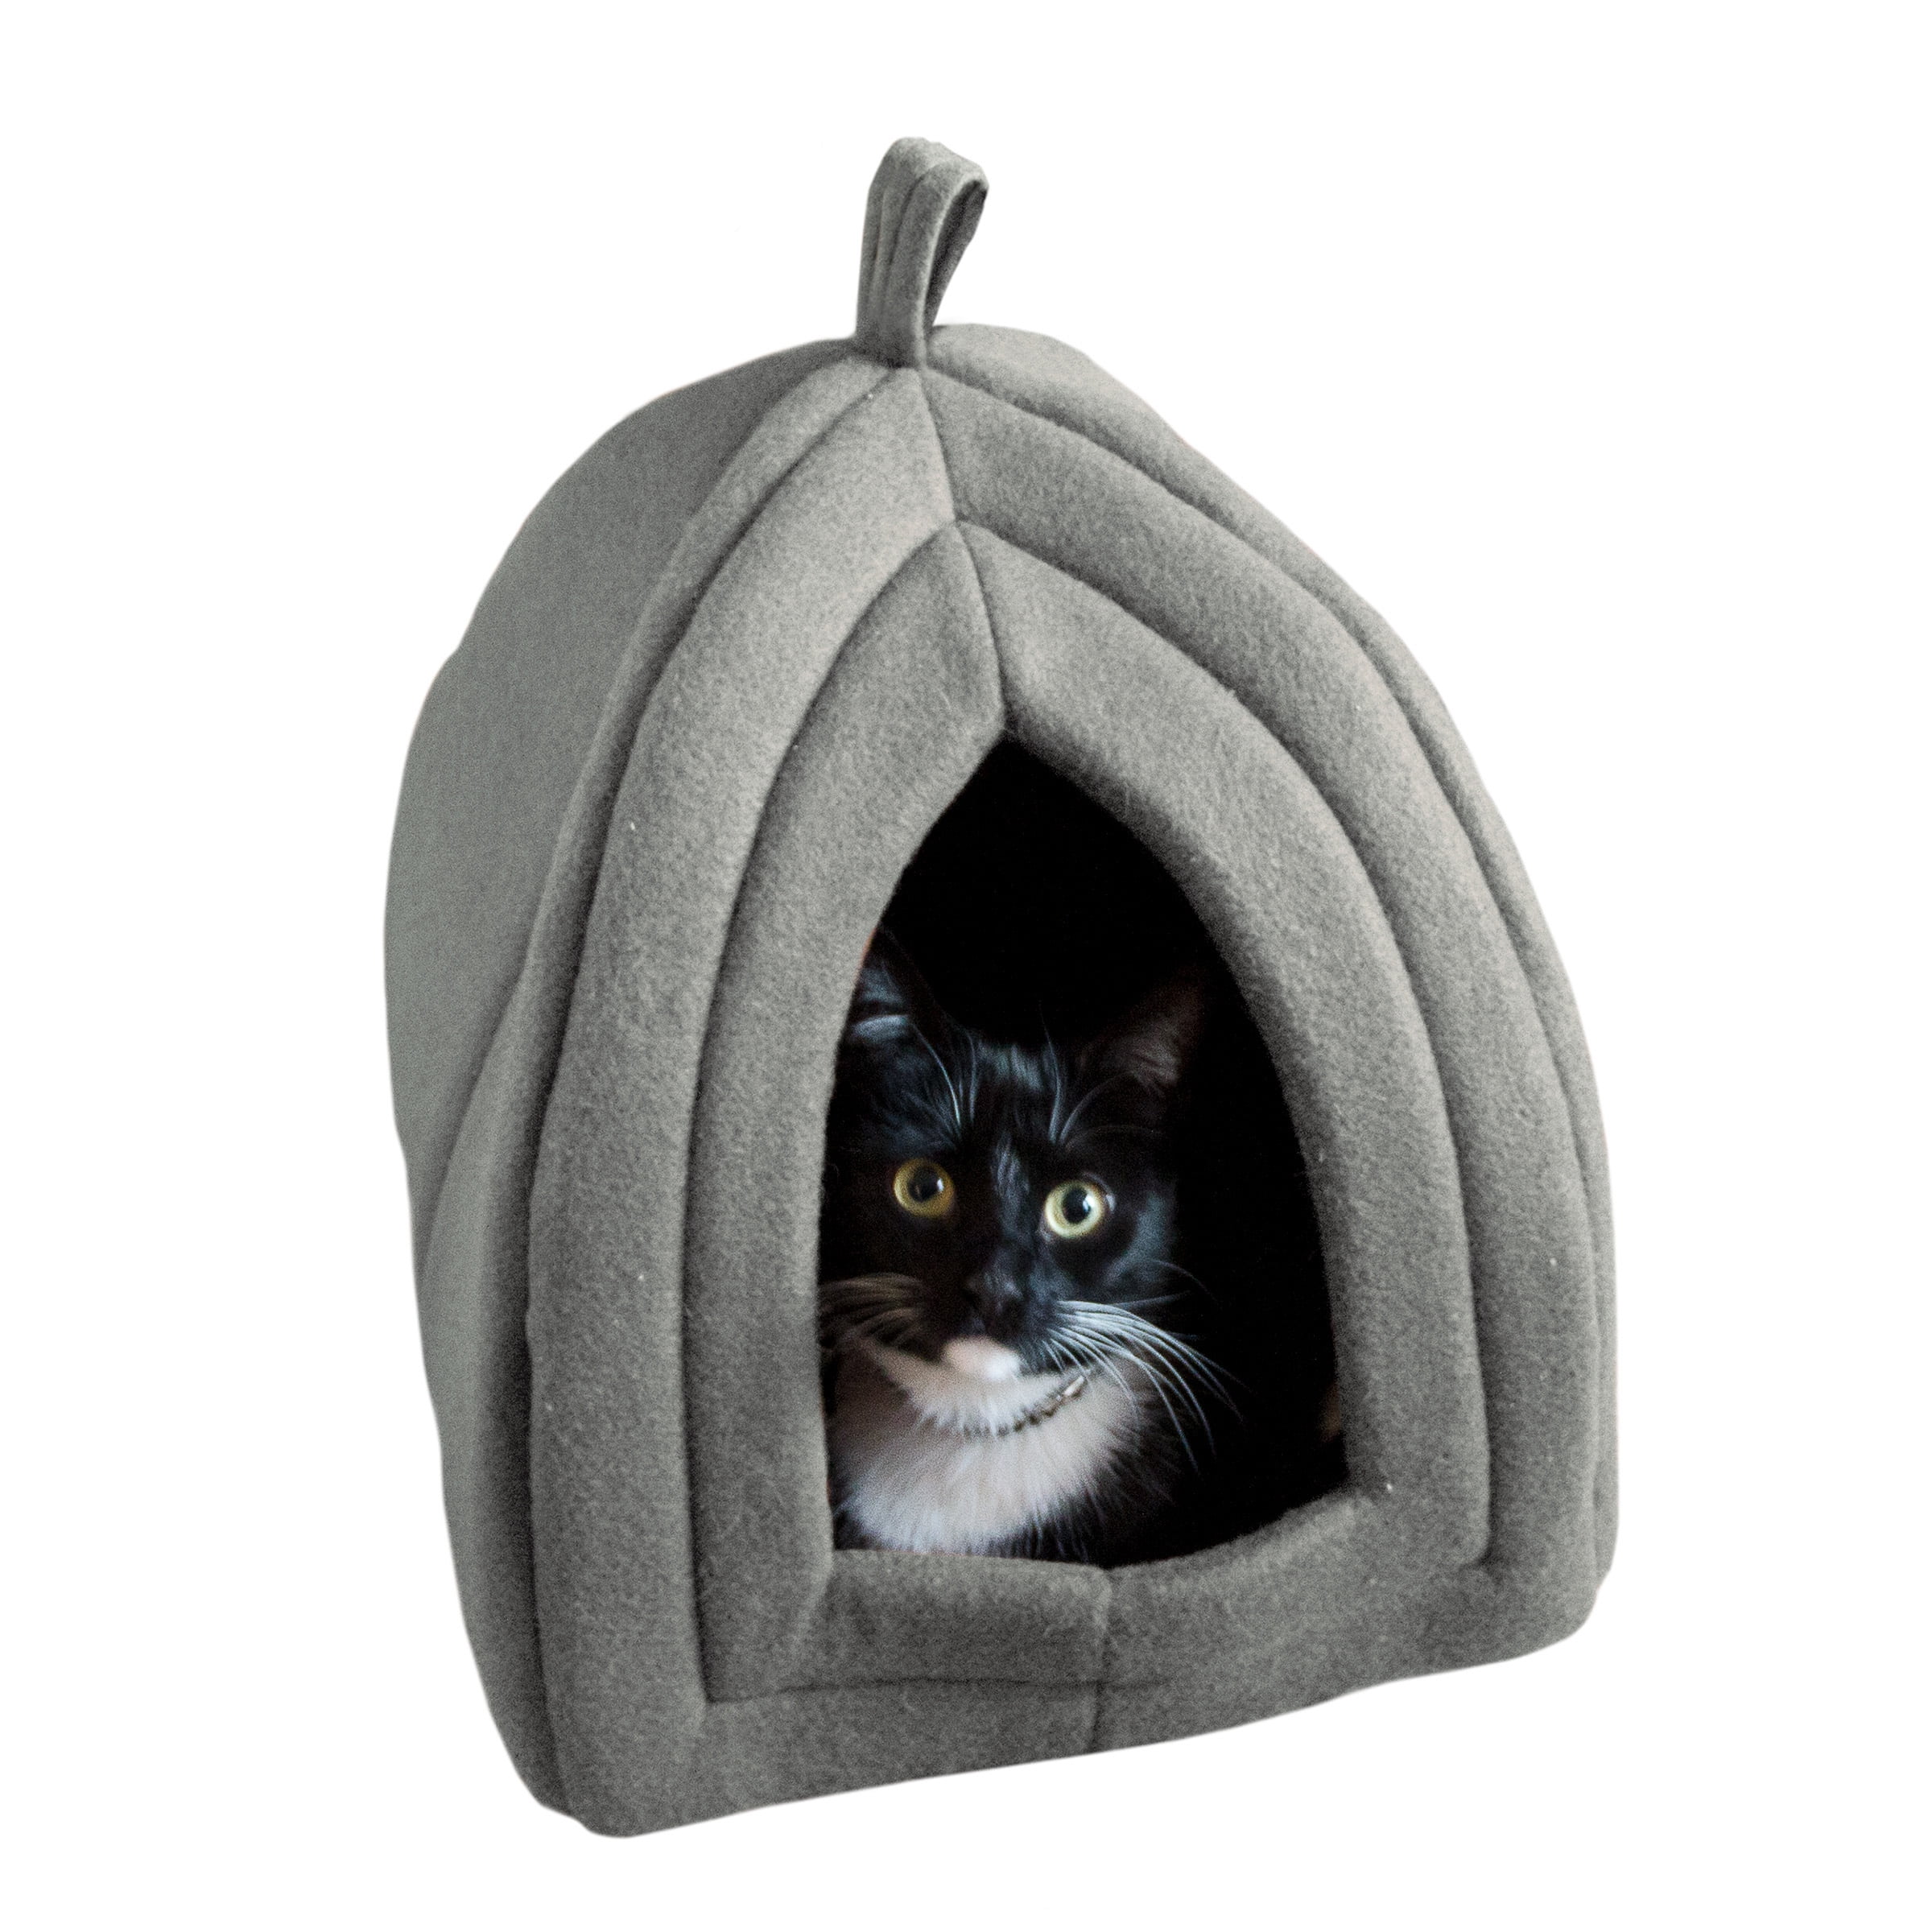 Machine Washable Self-Warming Beds House for Cats Dogs Love Dream Cat Beds for Indoor Cats Pet Tent Cave Bed for Cats Small Dogs Small, Grey Mouse